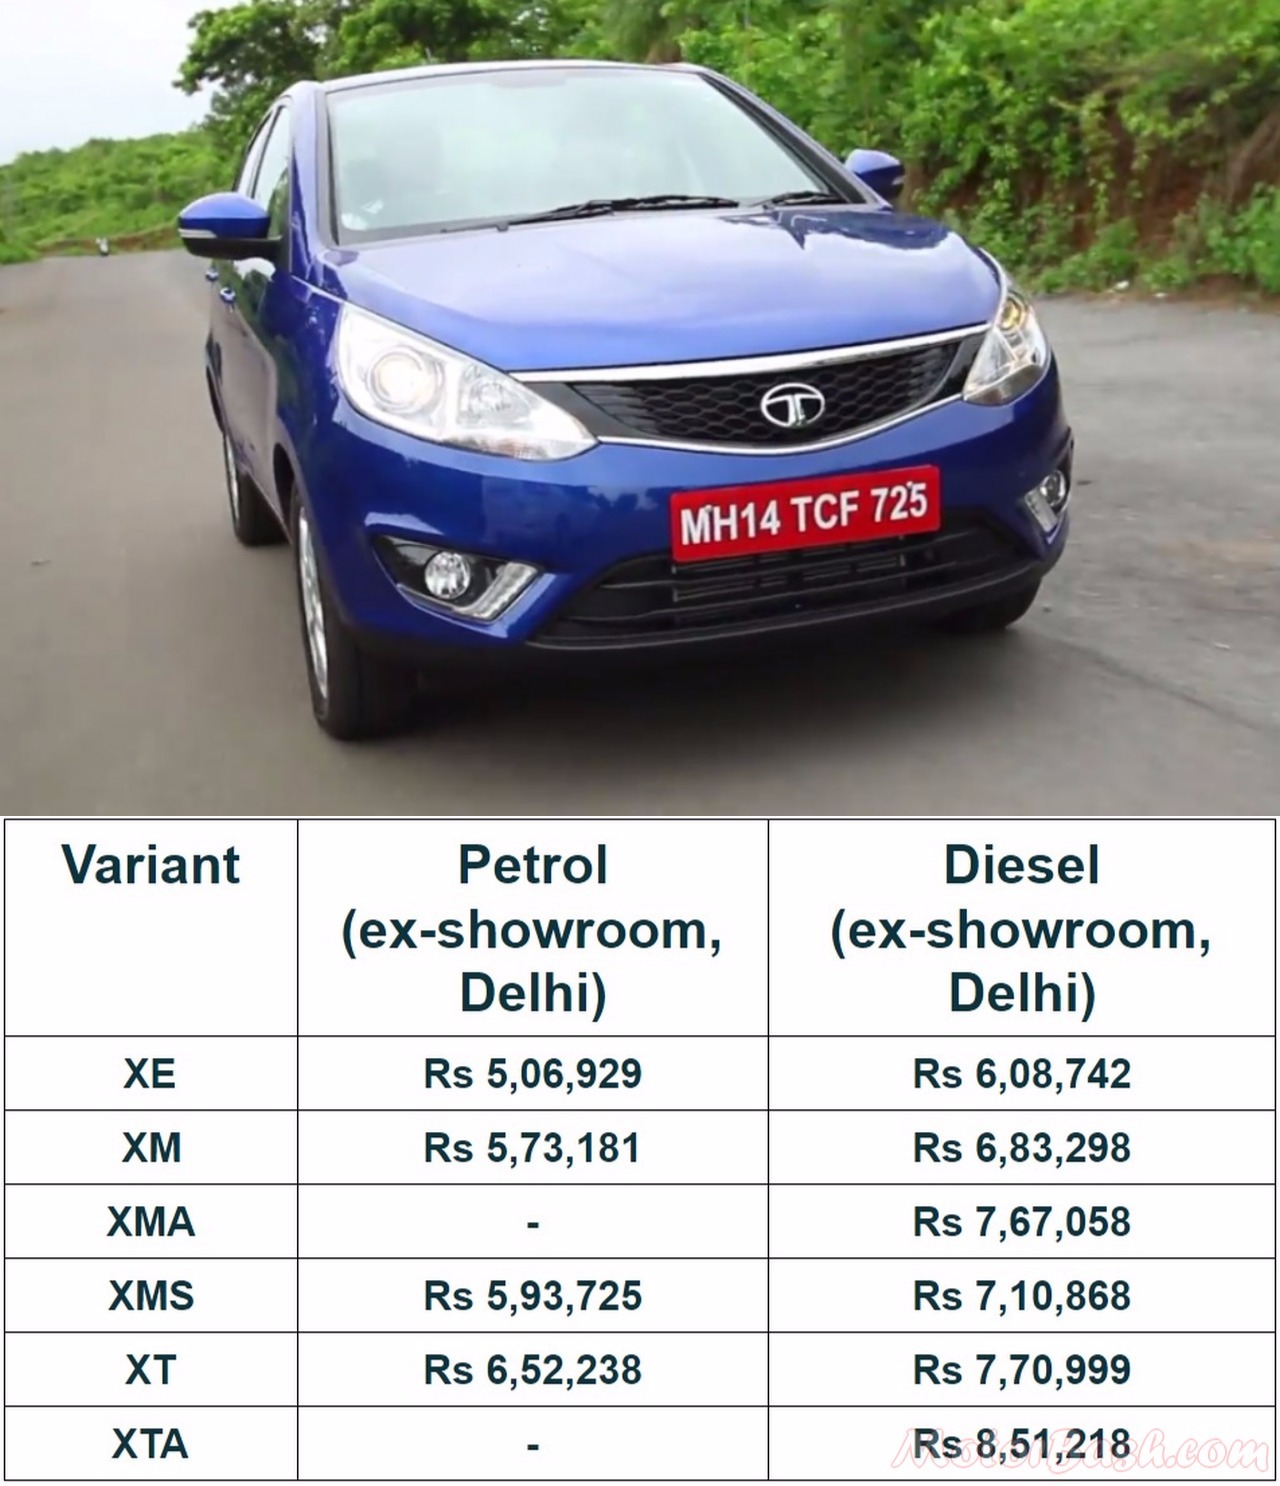 Tata Zest Performance Reviews - Check 40 Latest Reviews & Ratings